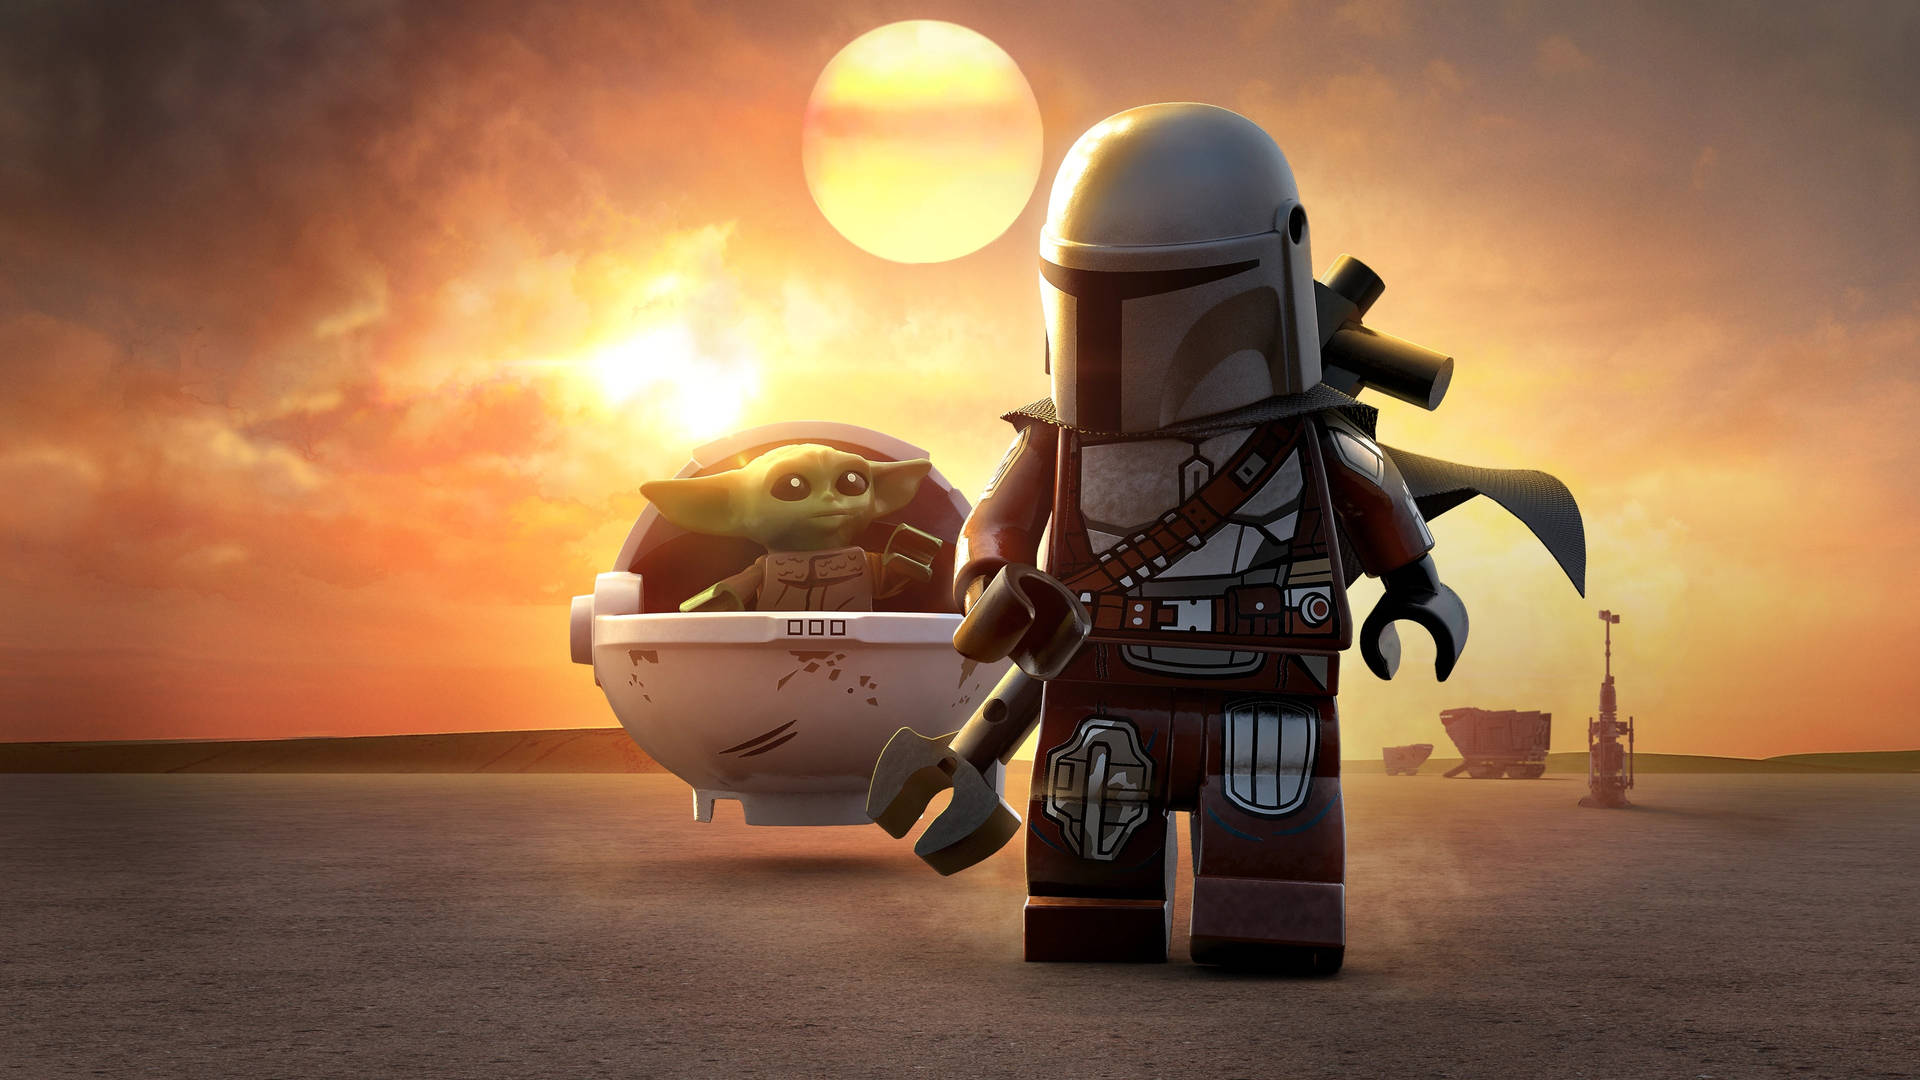 Create your own galactic adventure with Lego Star Wars! Wallpaper